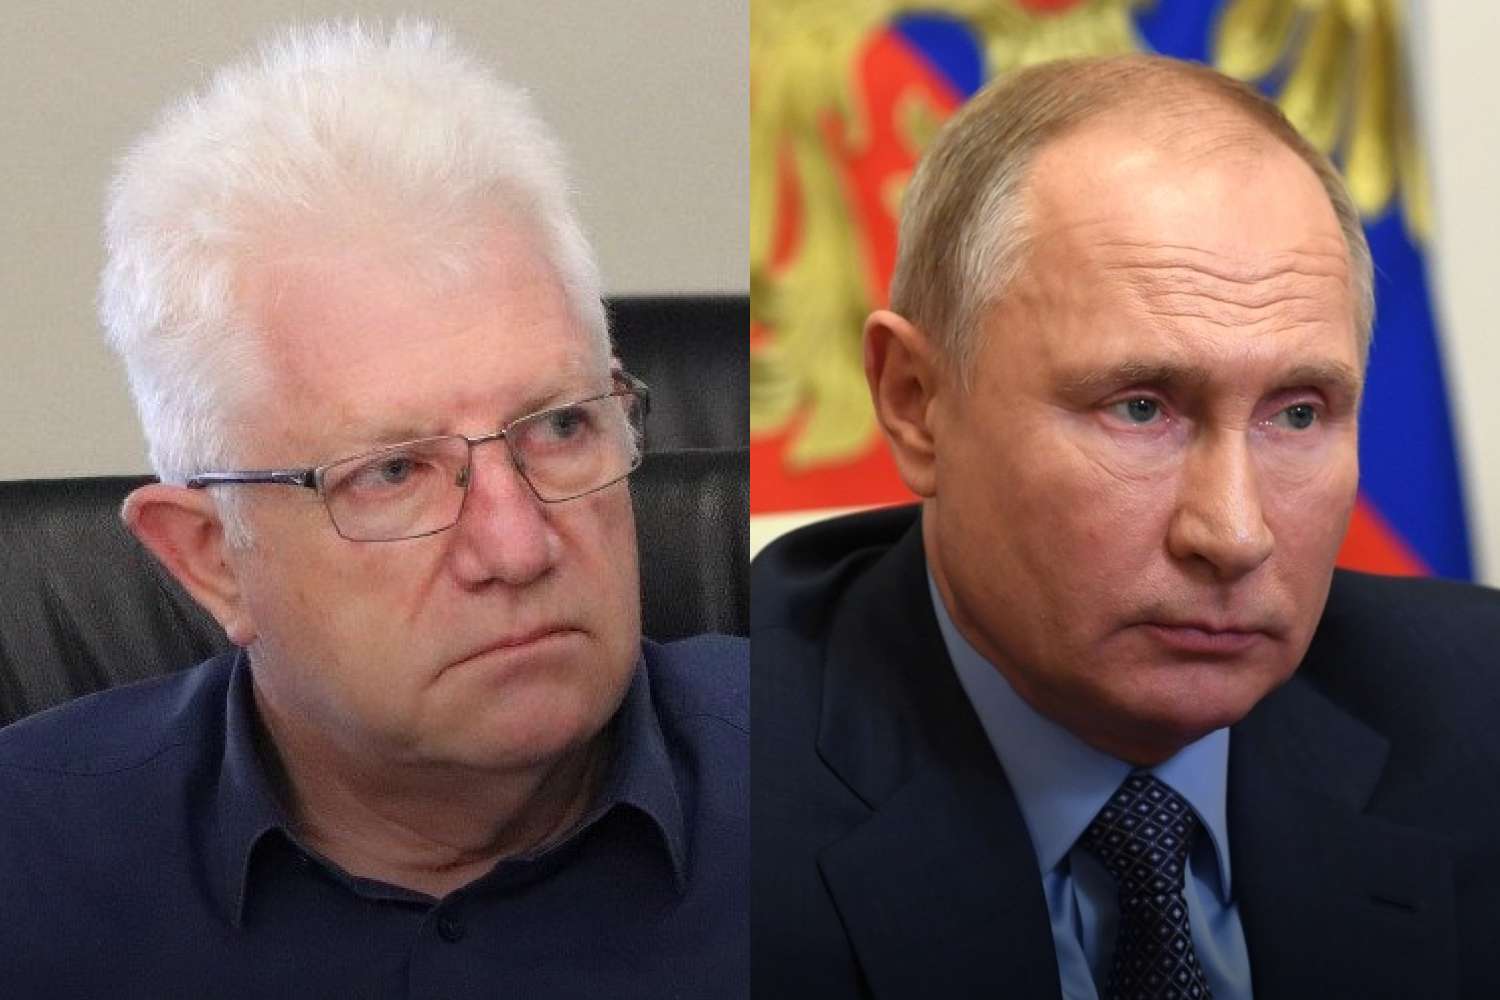 South Africans react after WC governor threatens to arrest Putin